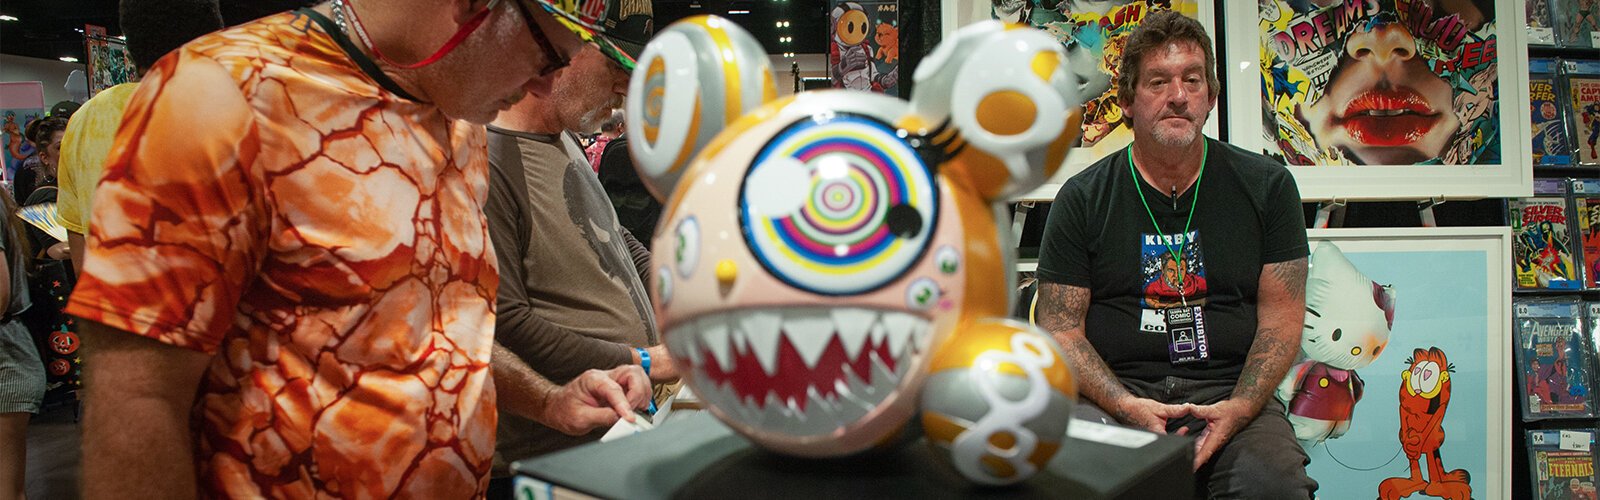 Exhibitor David Richard with End to End Gallery, waits as customers browse comic books at the Tampa Bay Comic Con. The fine art sculpture in the middle is by artist Takashi Murakami and is titled “Mr. Dob."